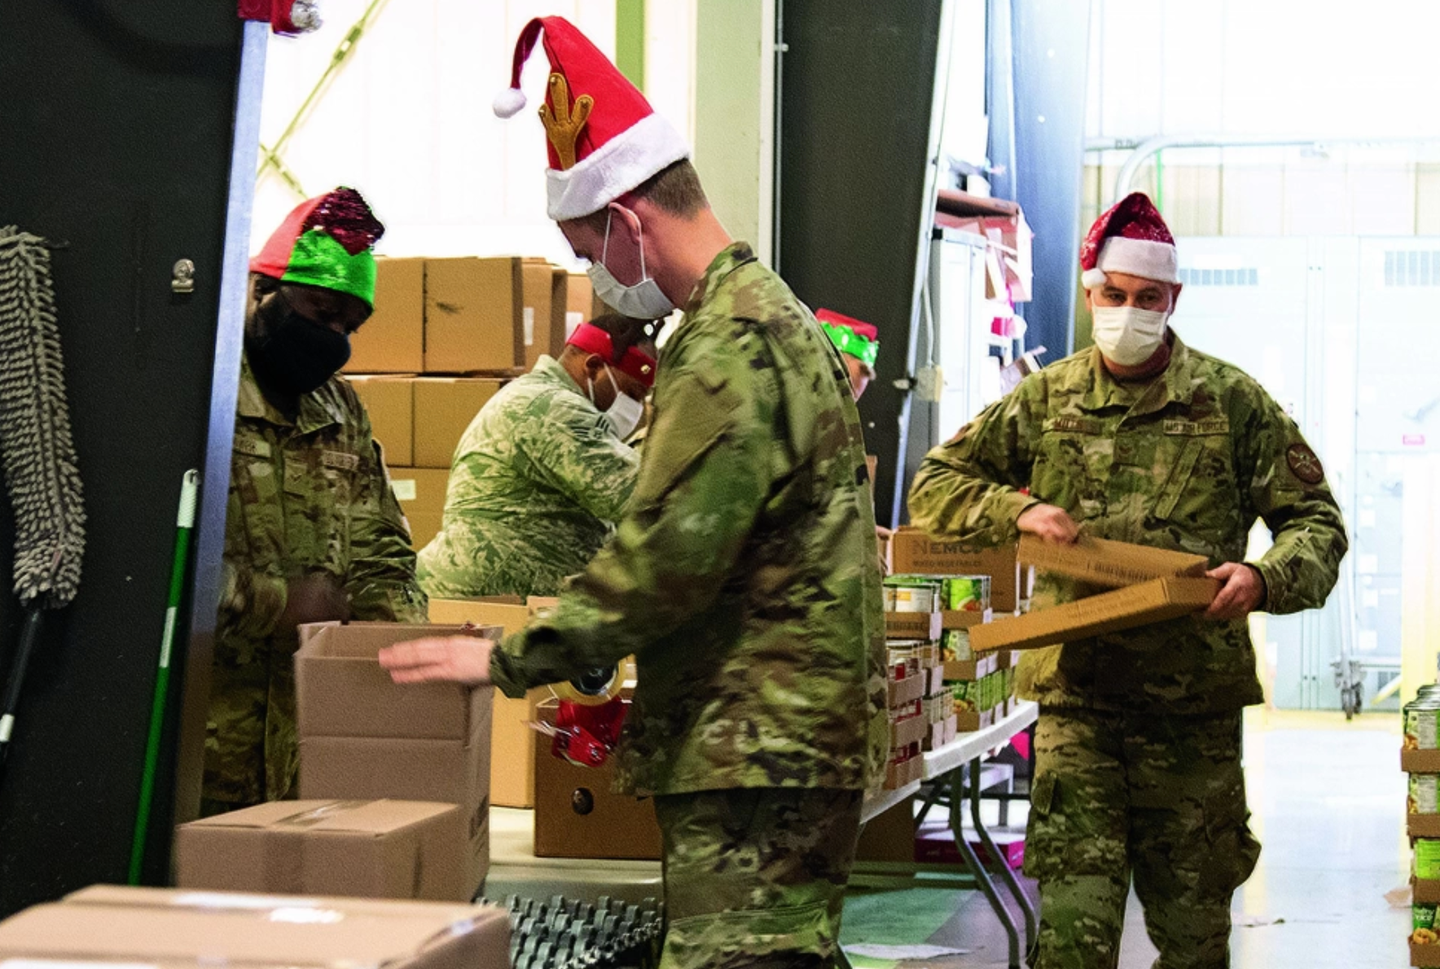 U.S. Airmen assigned with the Michigan National Guard’s COVID-19 response task force, are working at Food Gatherers food bank in Ann Arbor, Michigan, Dec. 3, 2020. The Airmen are working at the food bank and soup kitchen in Washtenaw County helping those in need of food.